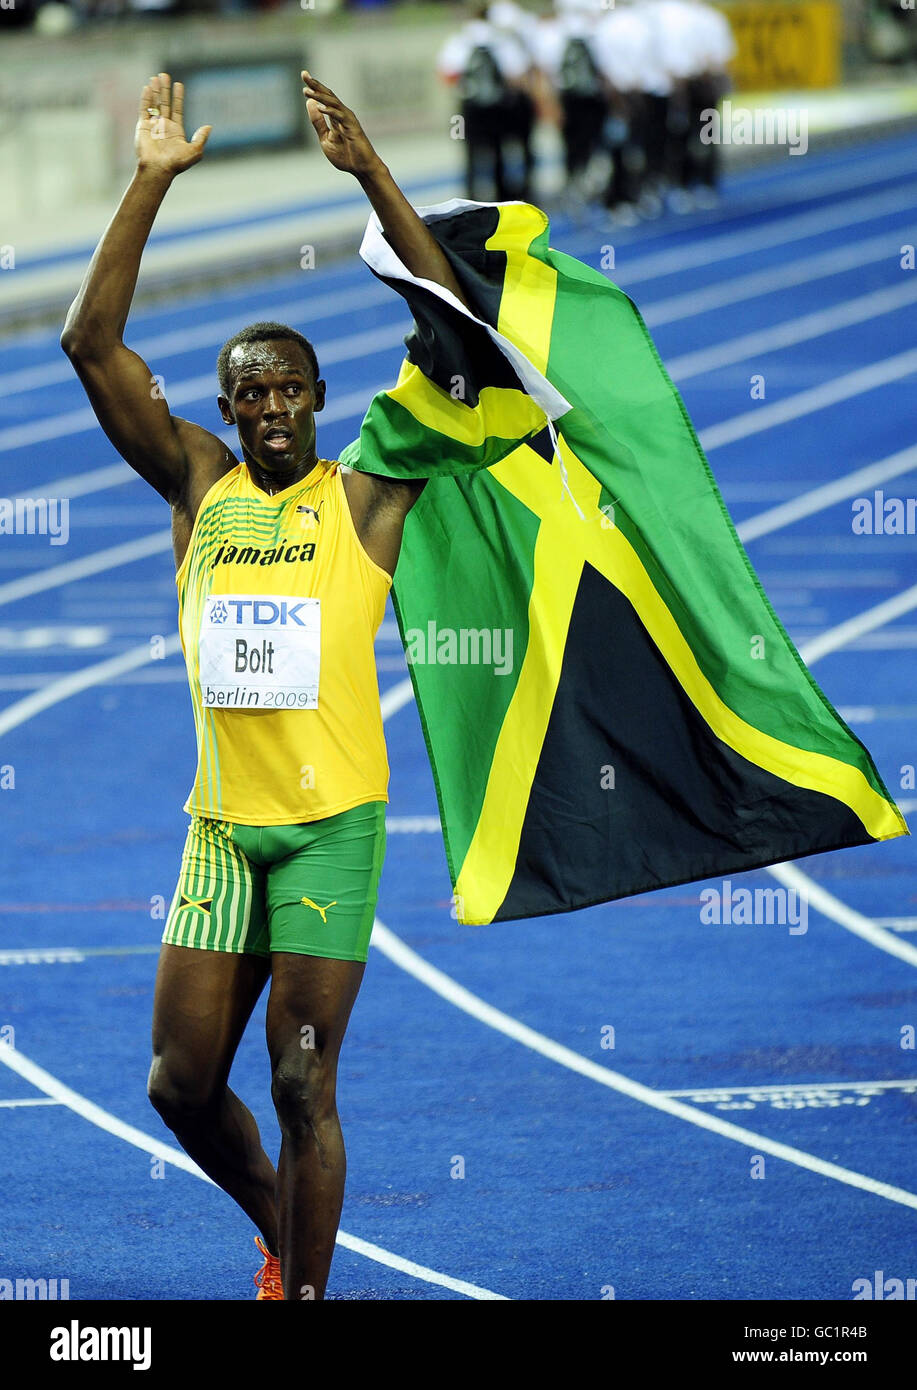 Jamaica's Usain Bolt celebrates winning the men's 100m final in a new world  record time of 9.58 seconds during the IAAF World Championships at the  Olympiastadion, Berlin Stock Photo - Alamy